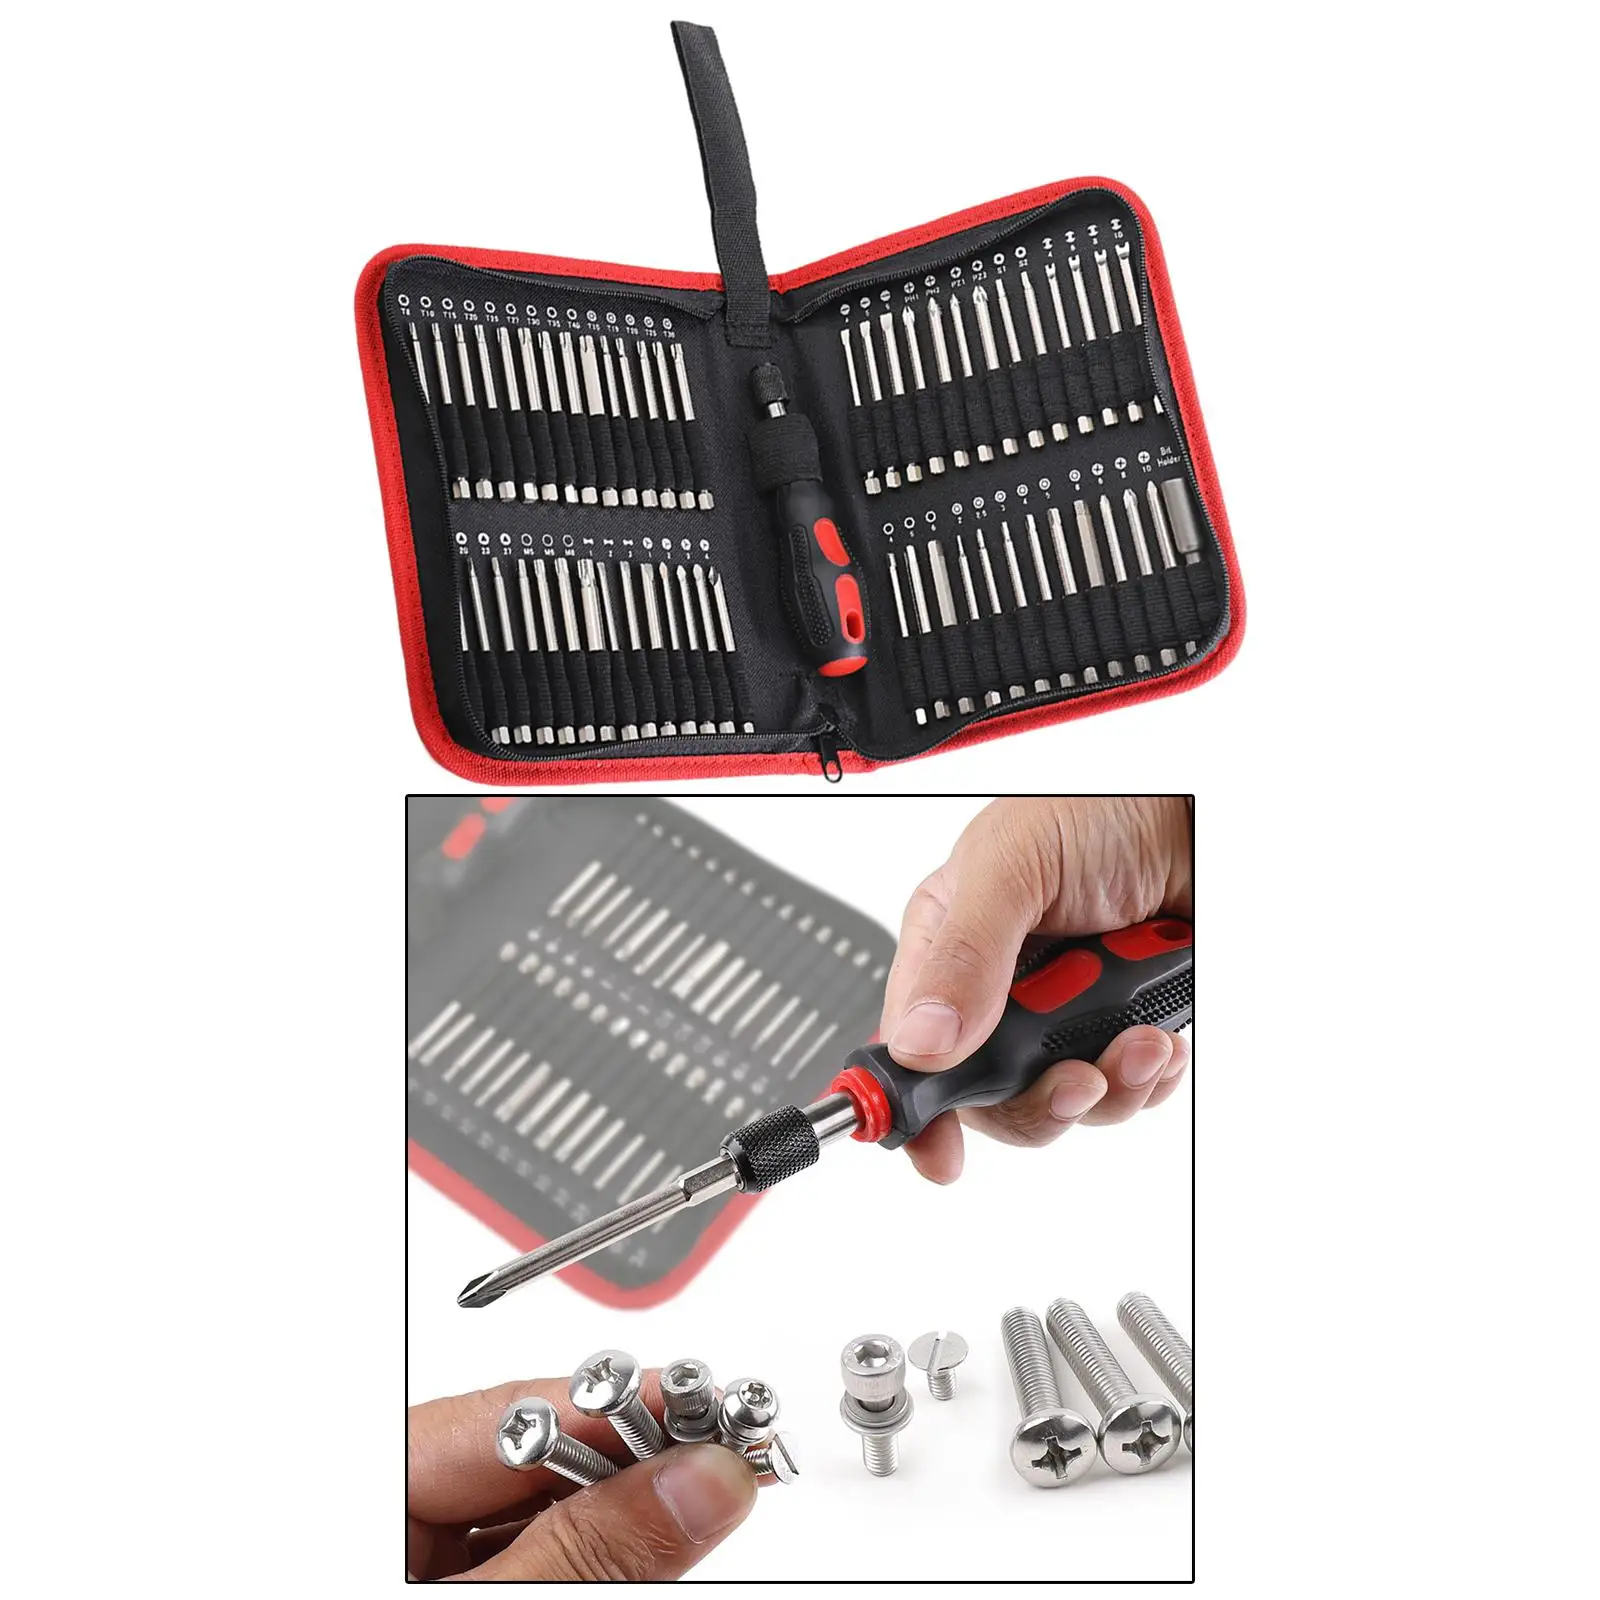 55 Pieces Handy Mini Electric Screwdrivers with 55 Precision Bits Repair Tool Kit Cordless Power Screwdriver Set for Phone Watch